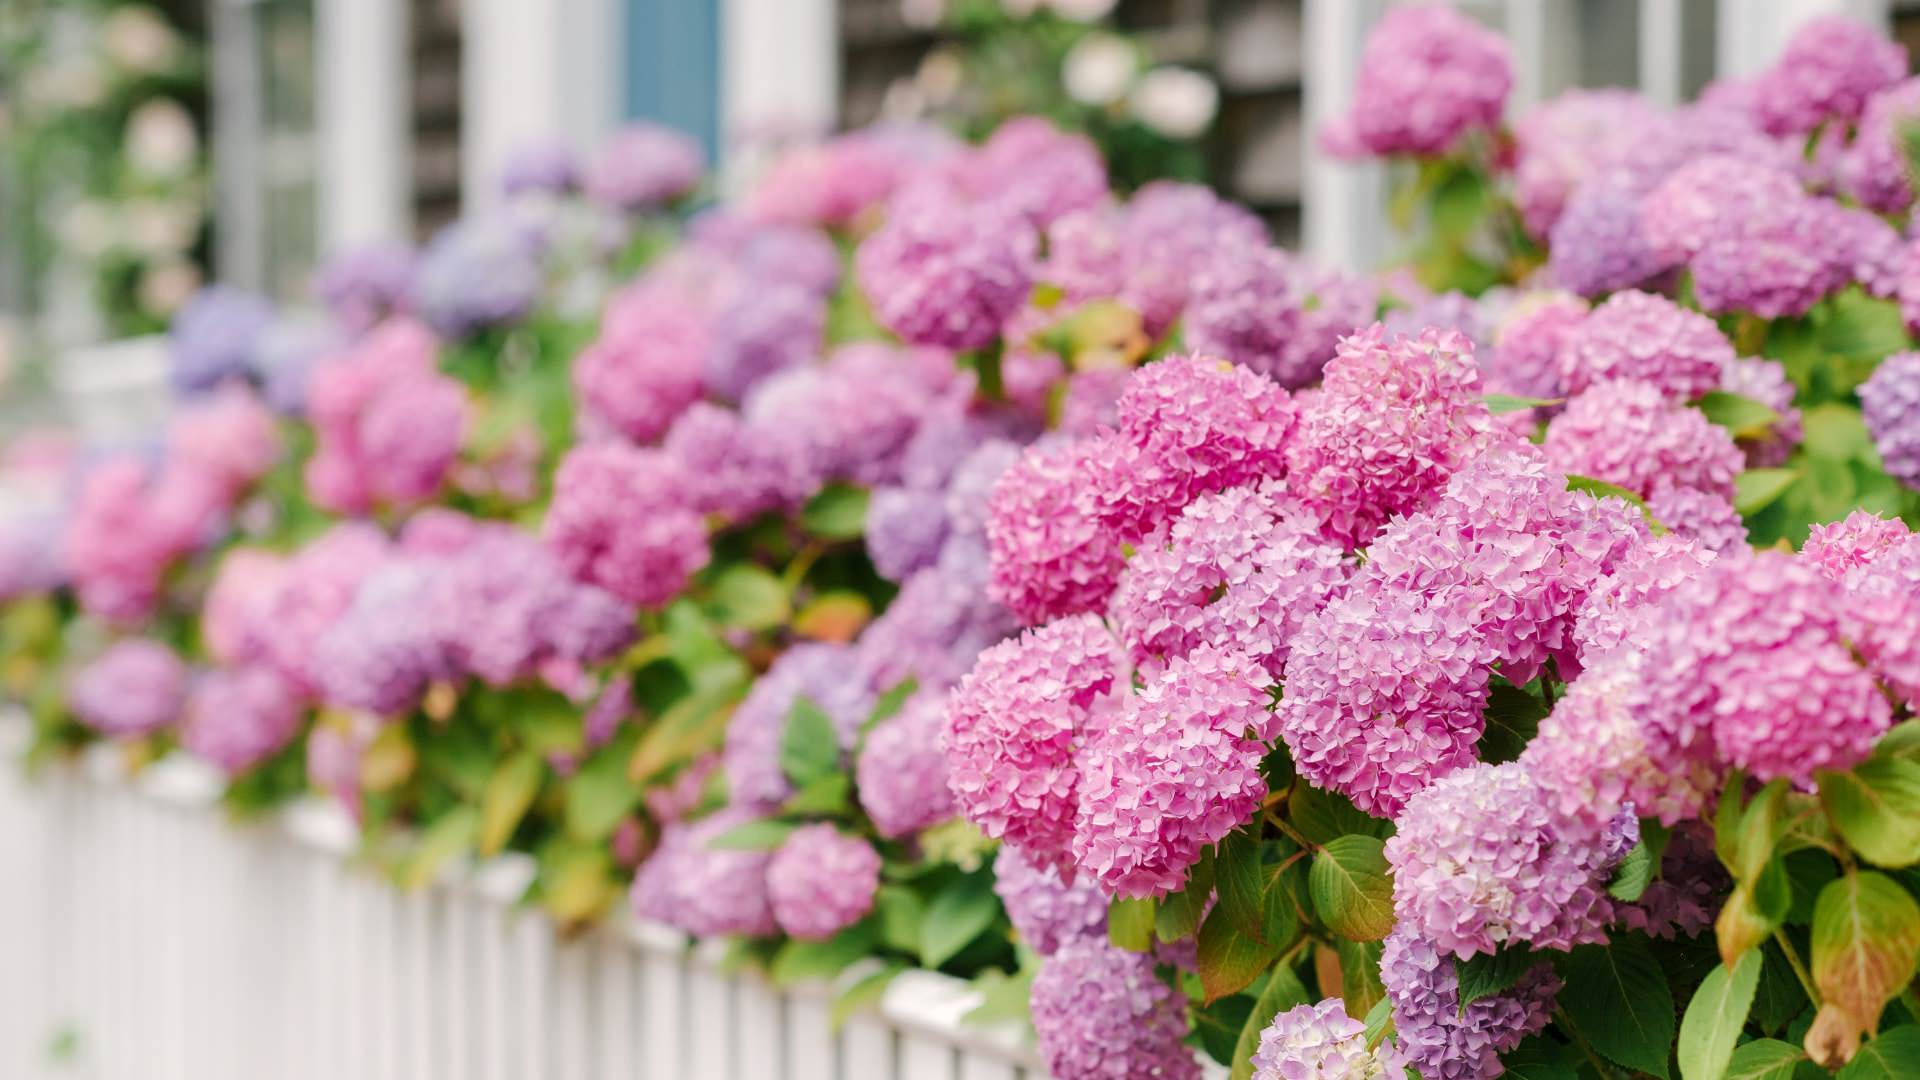 Close up view of pink and purple hydrangeas in white planter boxes